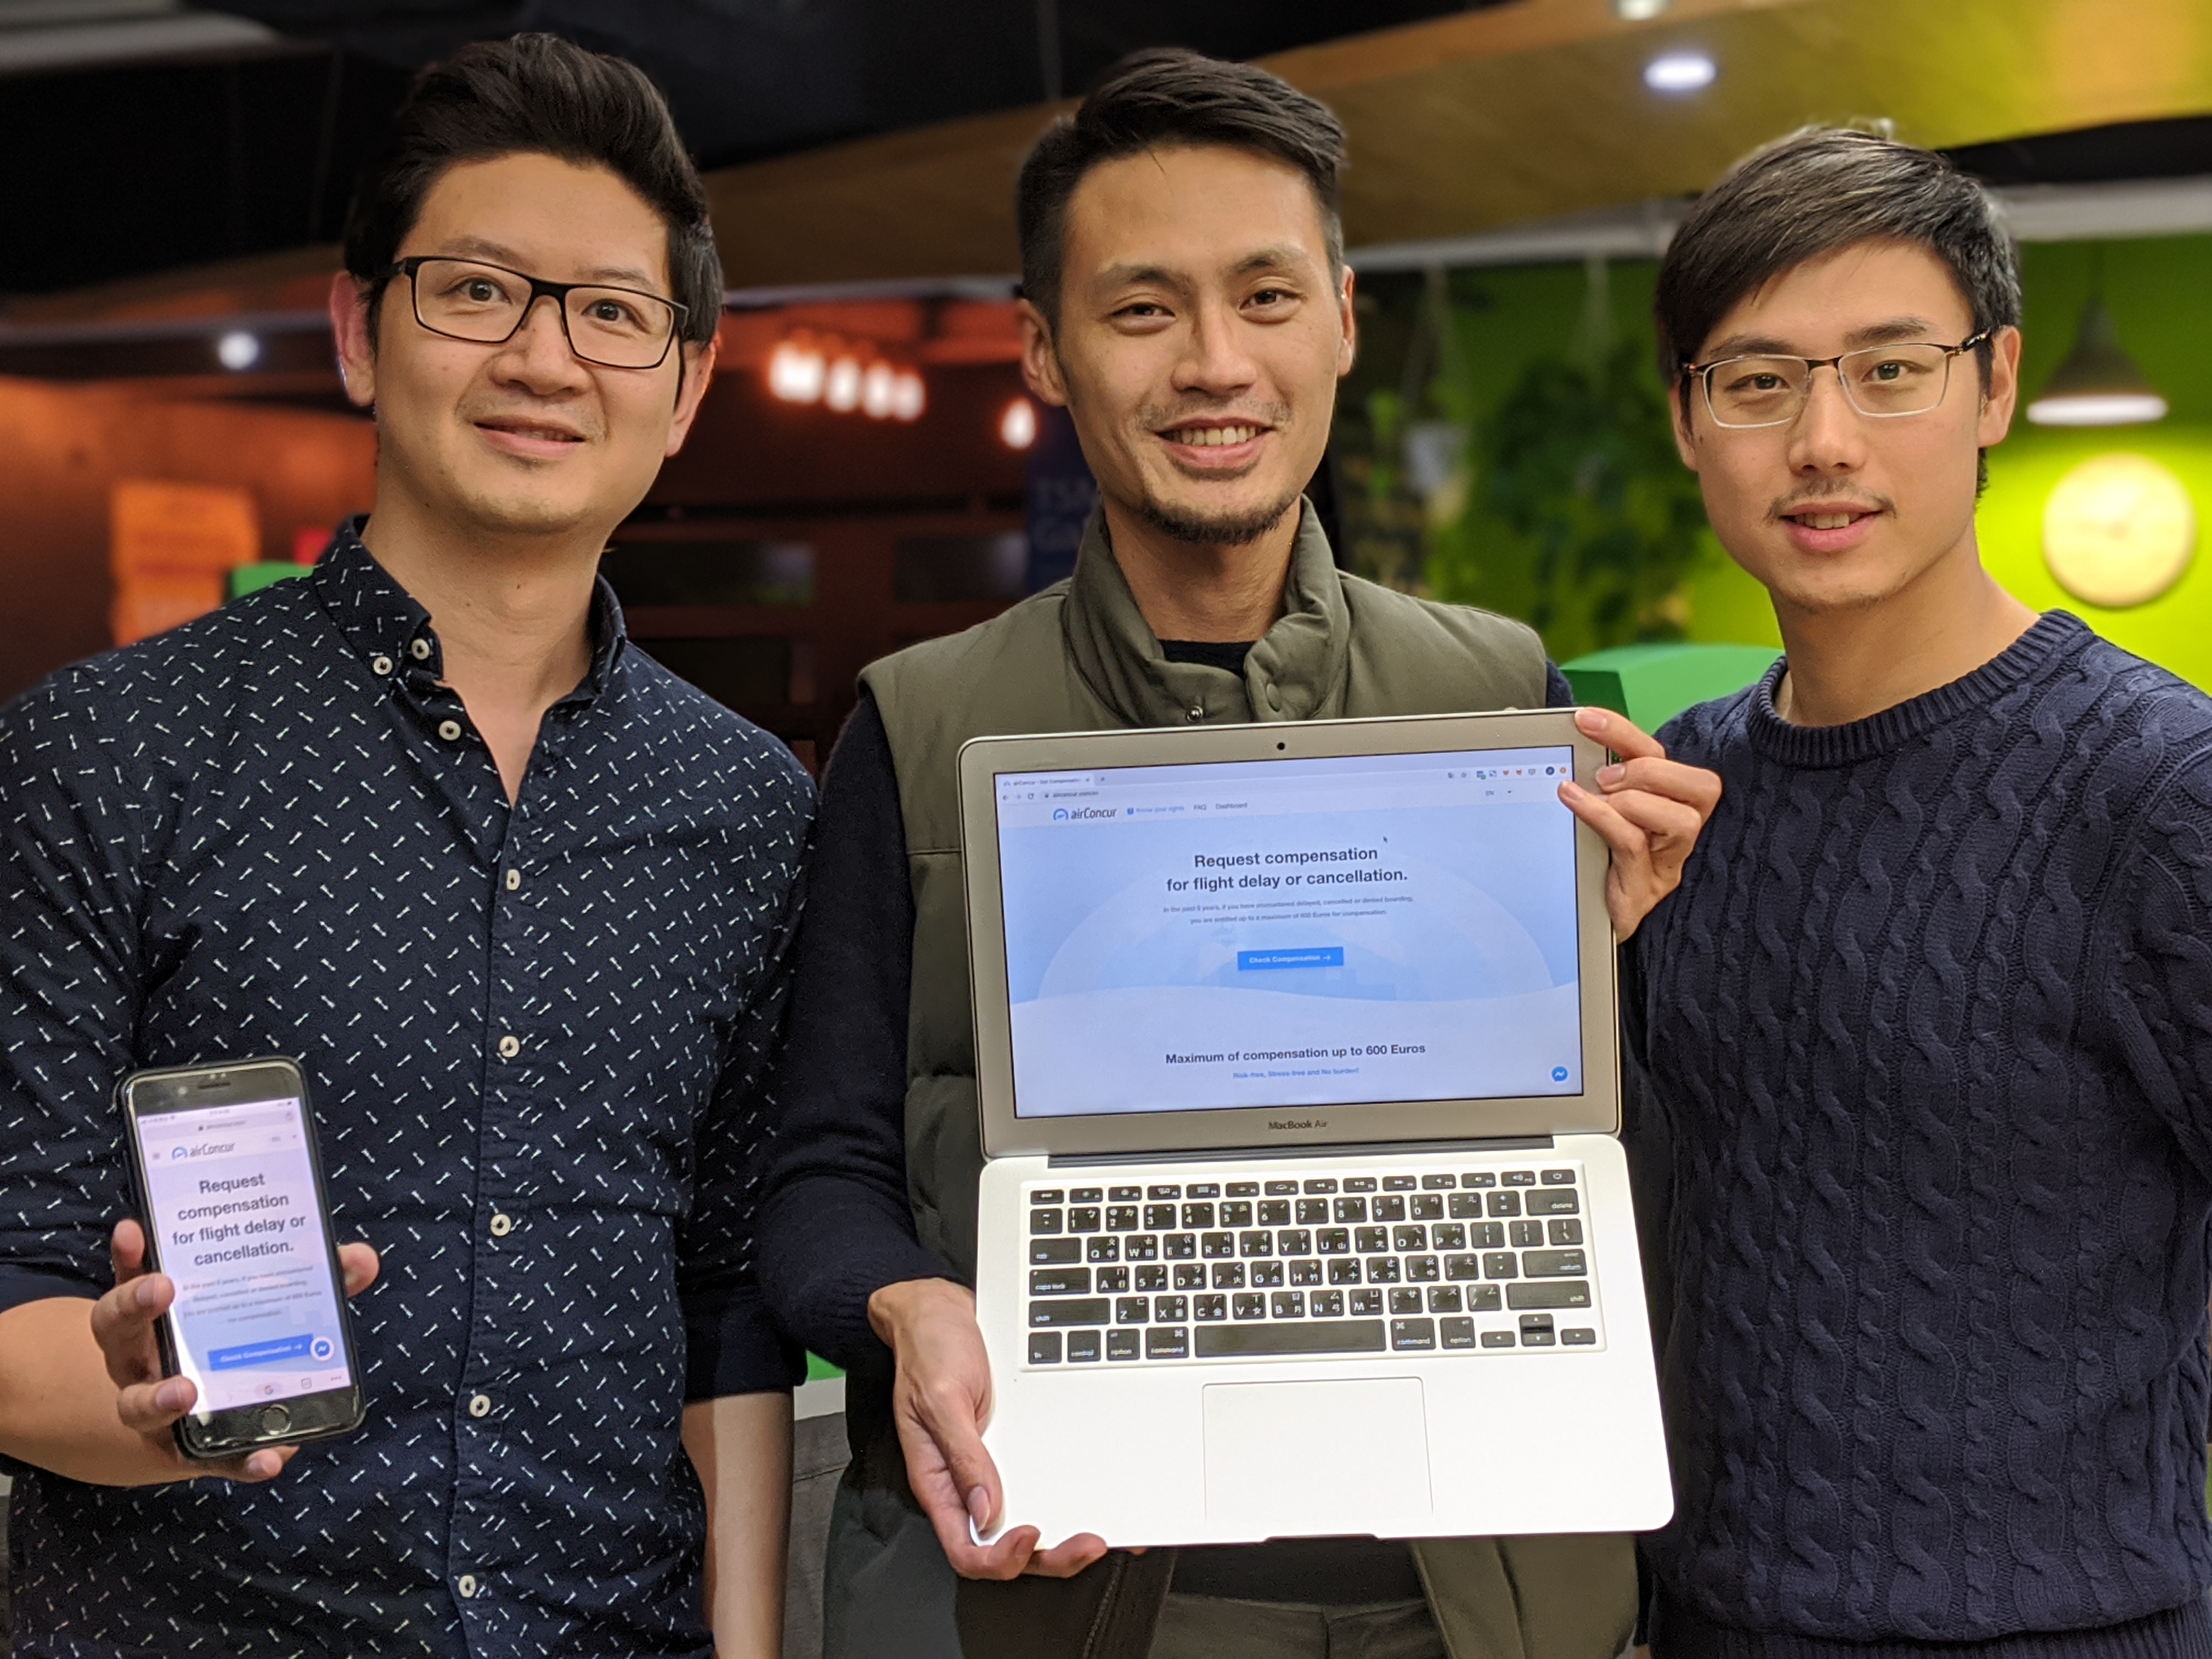 Taiwanese Travel Startup airConcur facilitates compensation upto 600 Euros for flight delays and cancellation